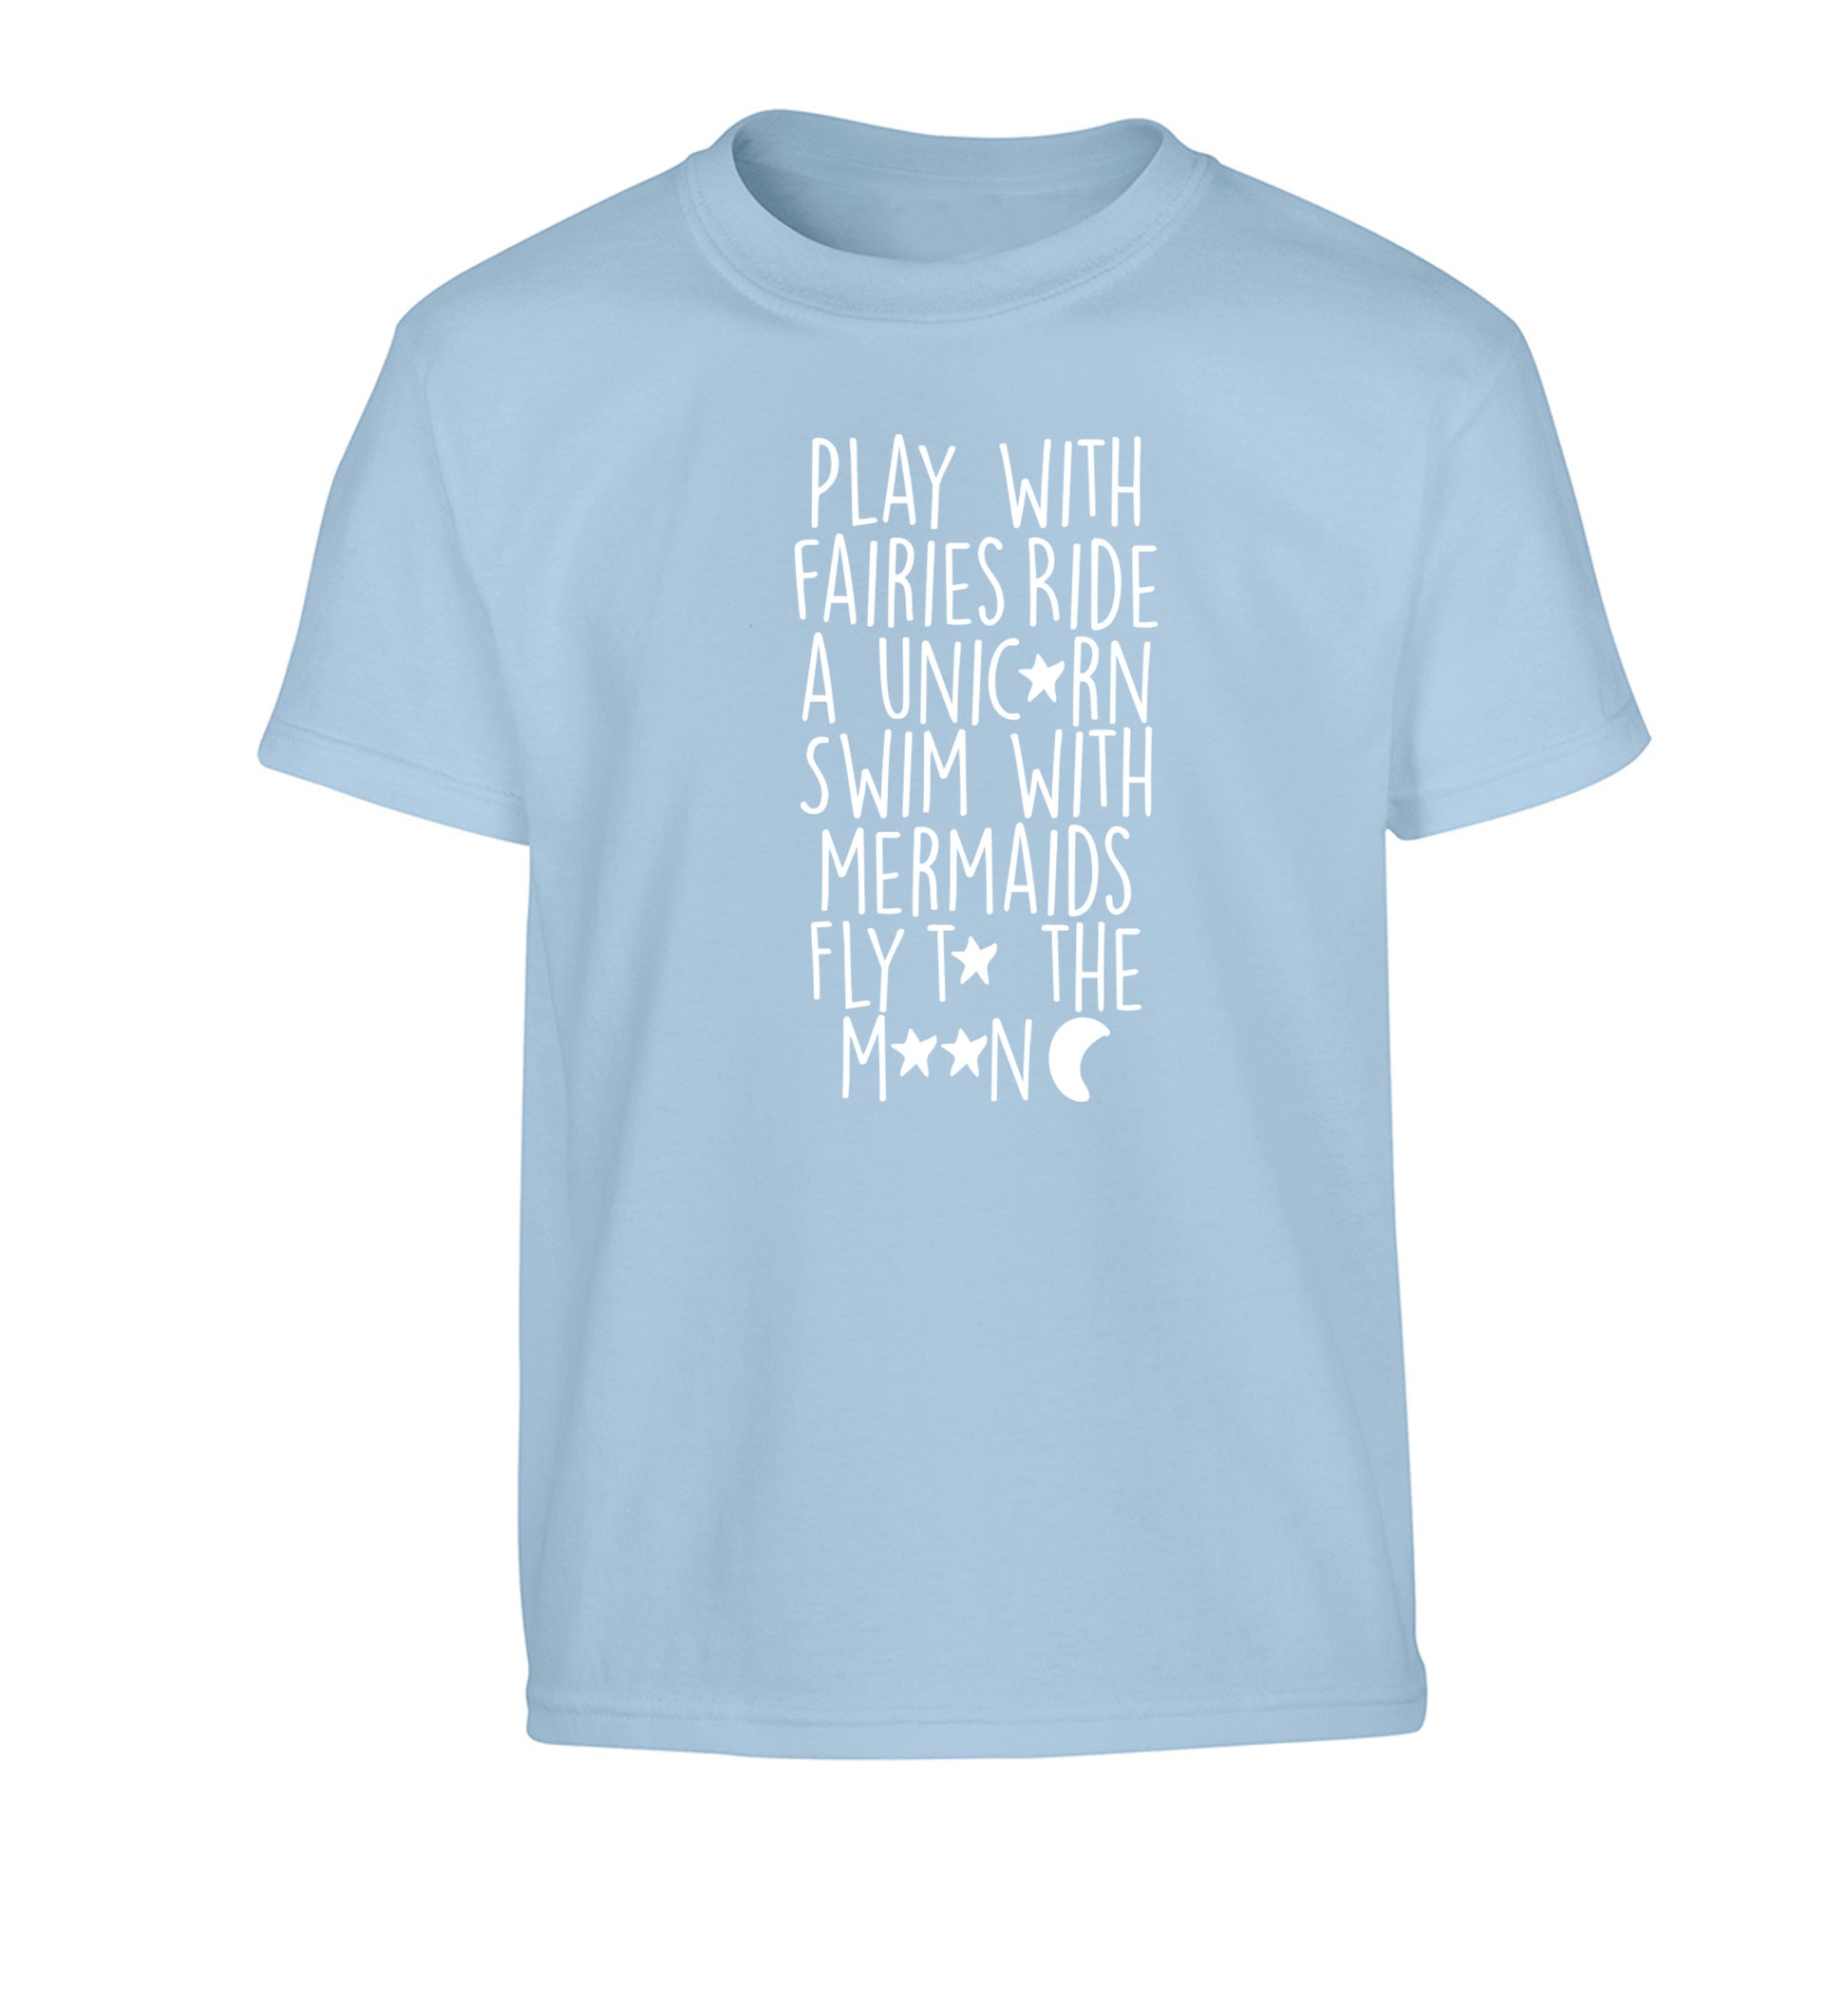 Play with fairies ride a unicorn swim with mermaids fly to the moon Children's light blue Tshirt 12-14 Years